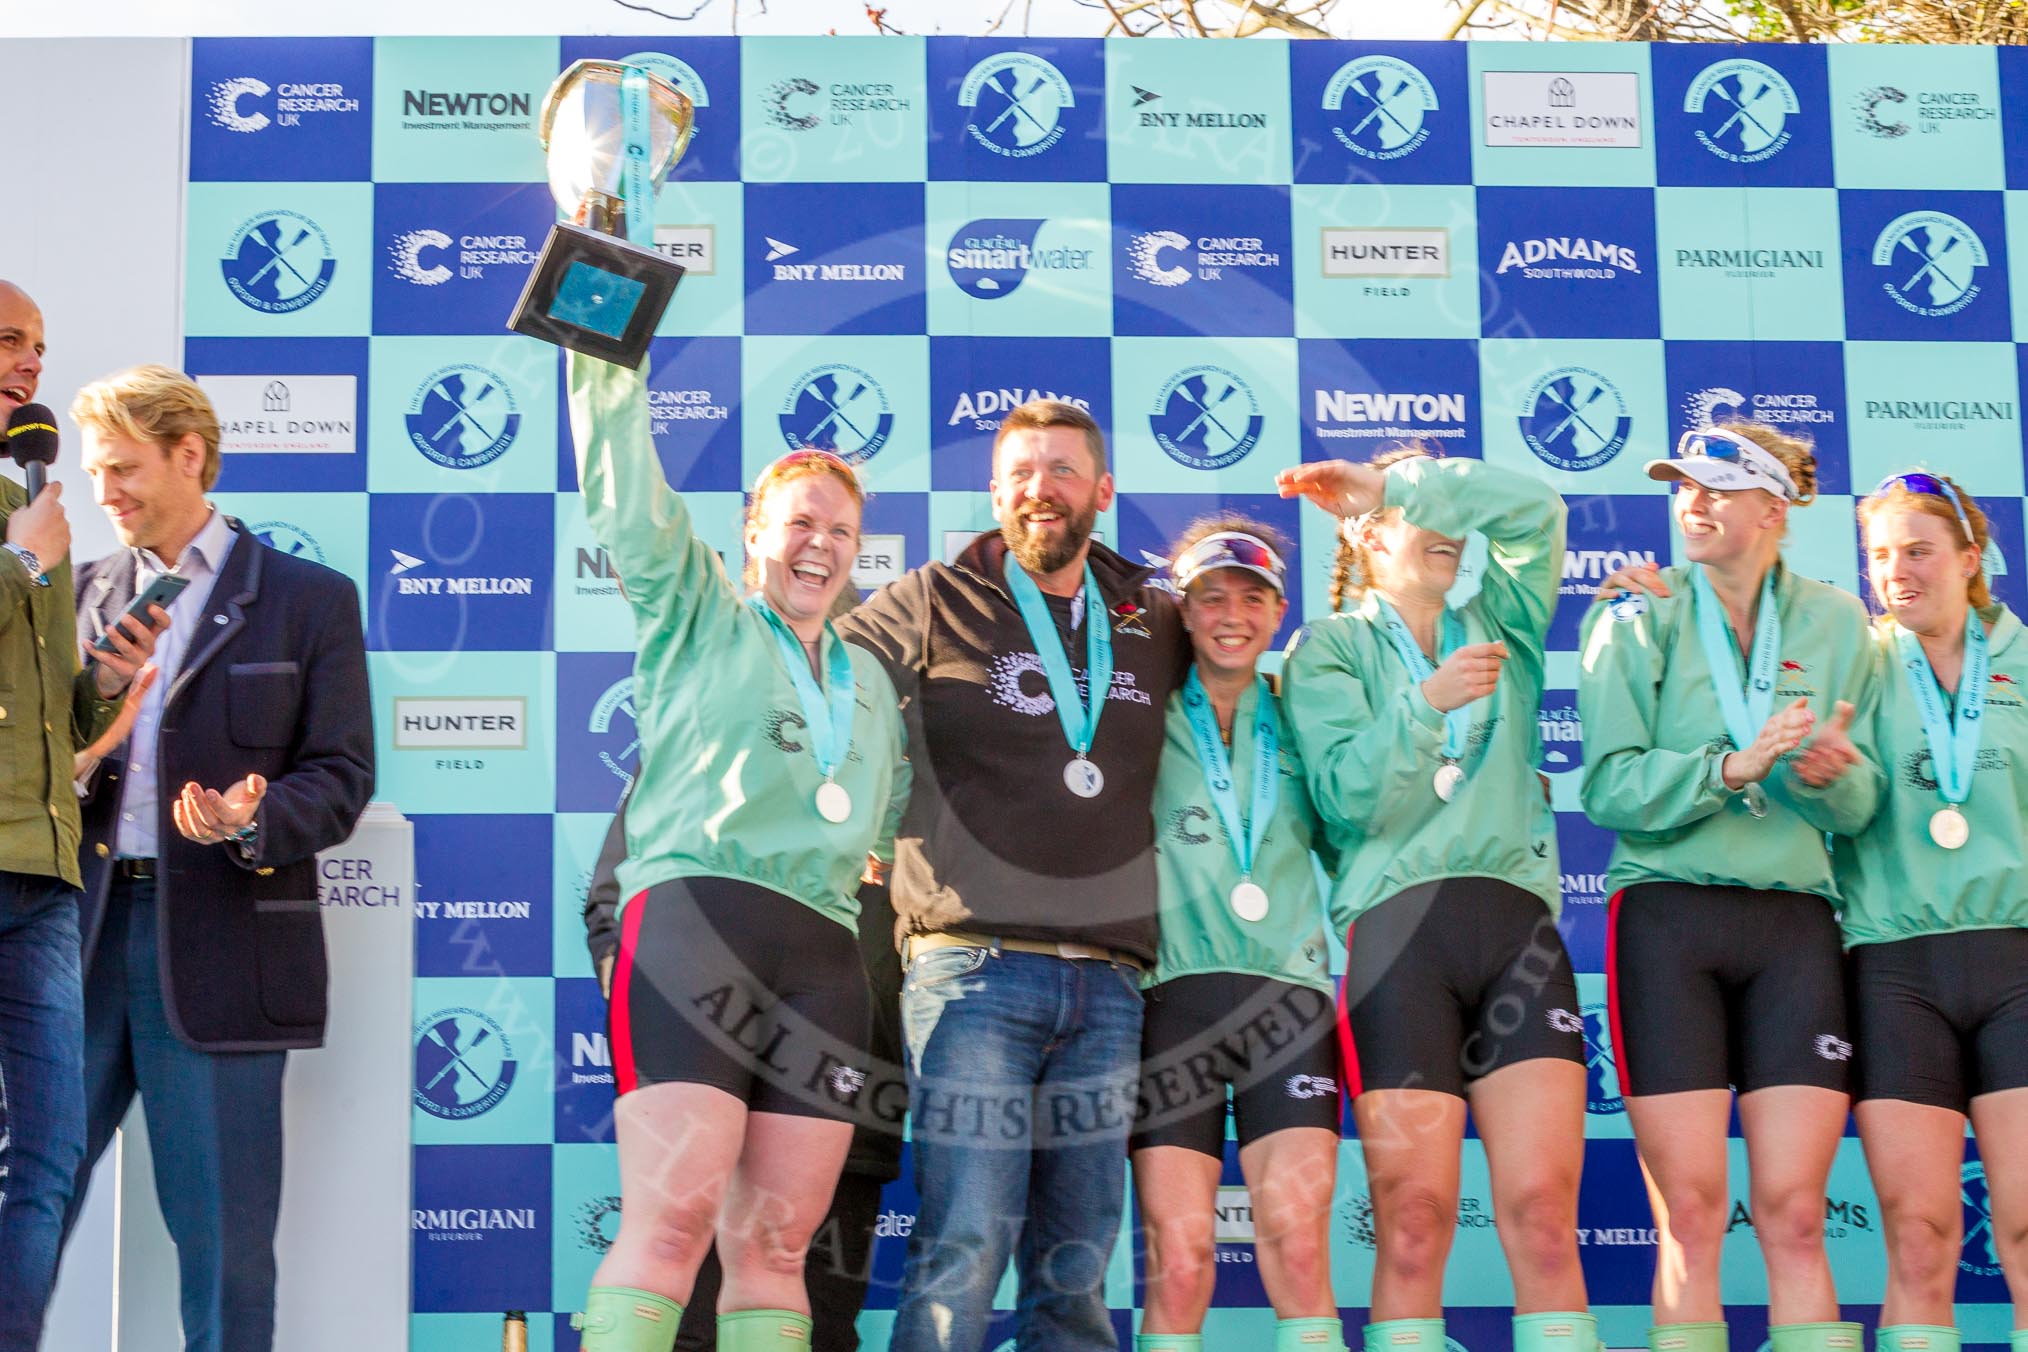 The Boat Race season 2017 -  The Cancer Research Women's Boat Race: A jubilant Ashton Brown with the Women's Boat Race trophy at the price giving.
River Thames between Putney Bridge and Mortlake,
London SW15,

United Kingdom,
on 02 April 2017 at 17:11, image #239